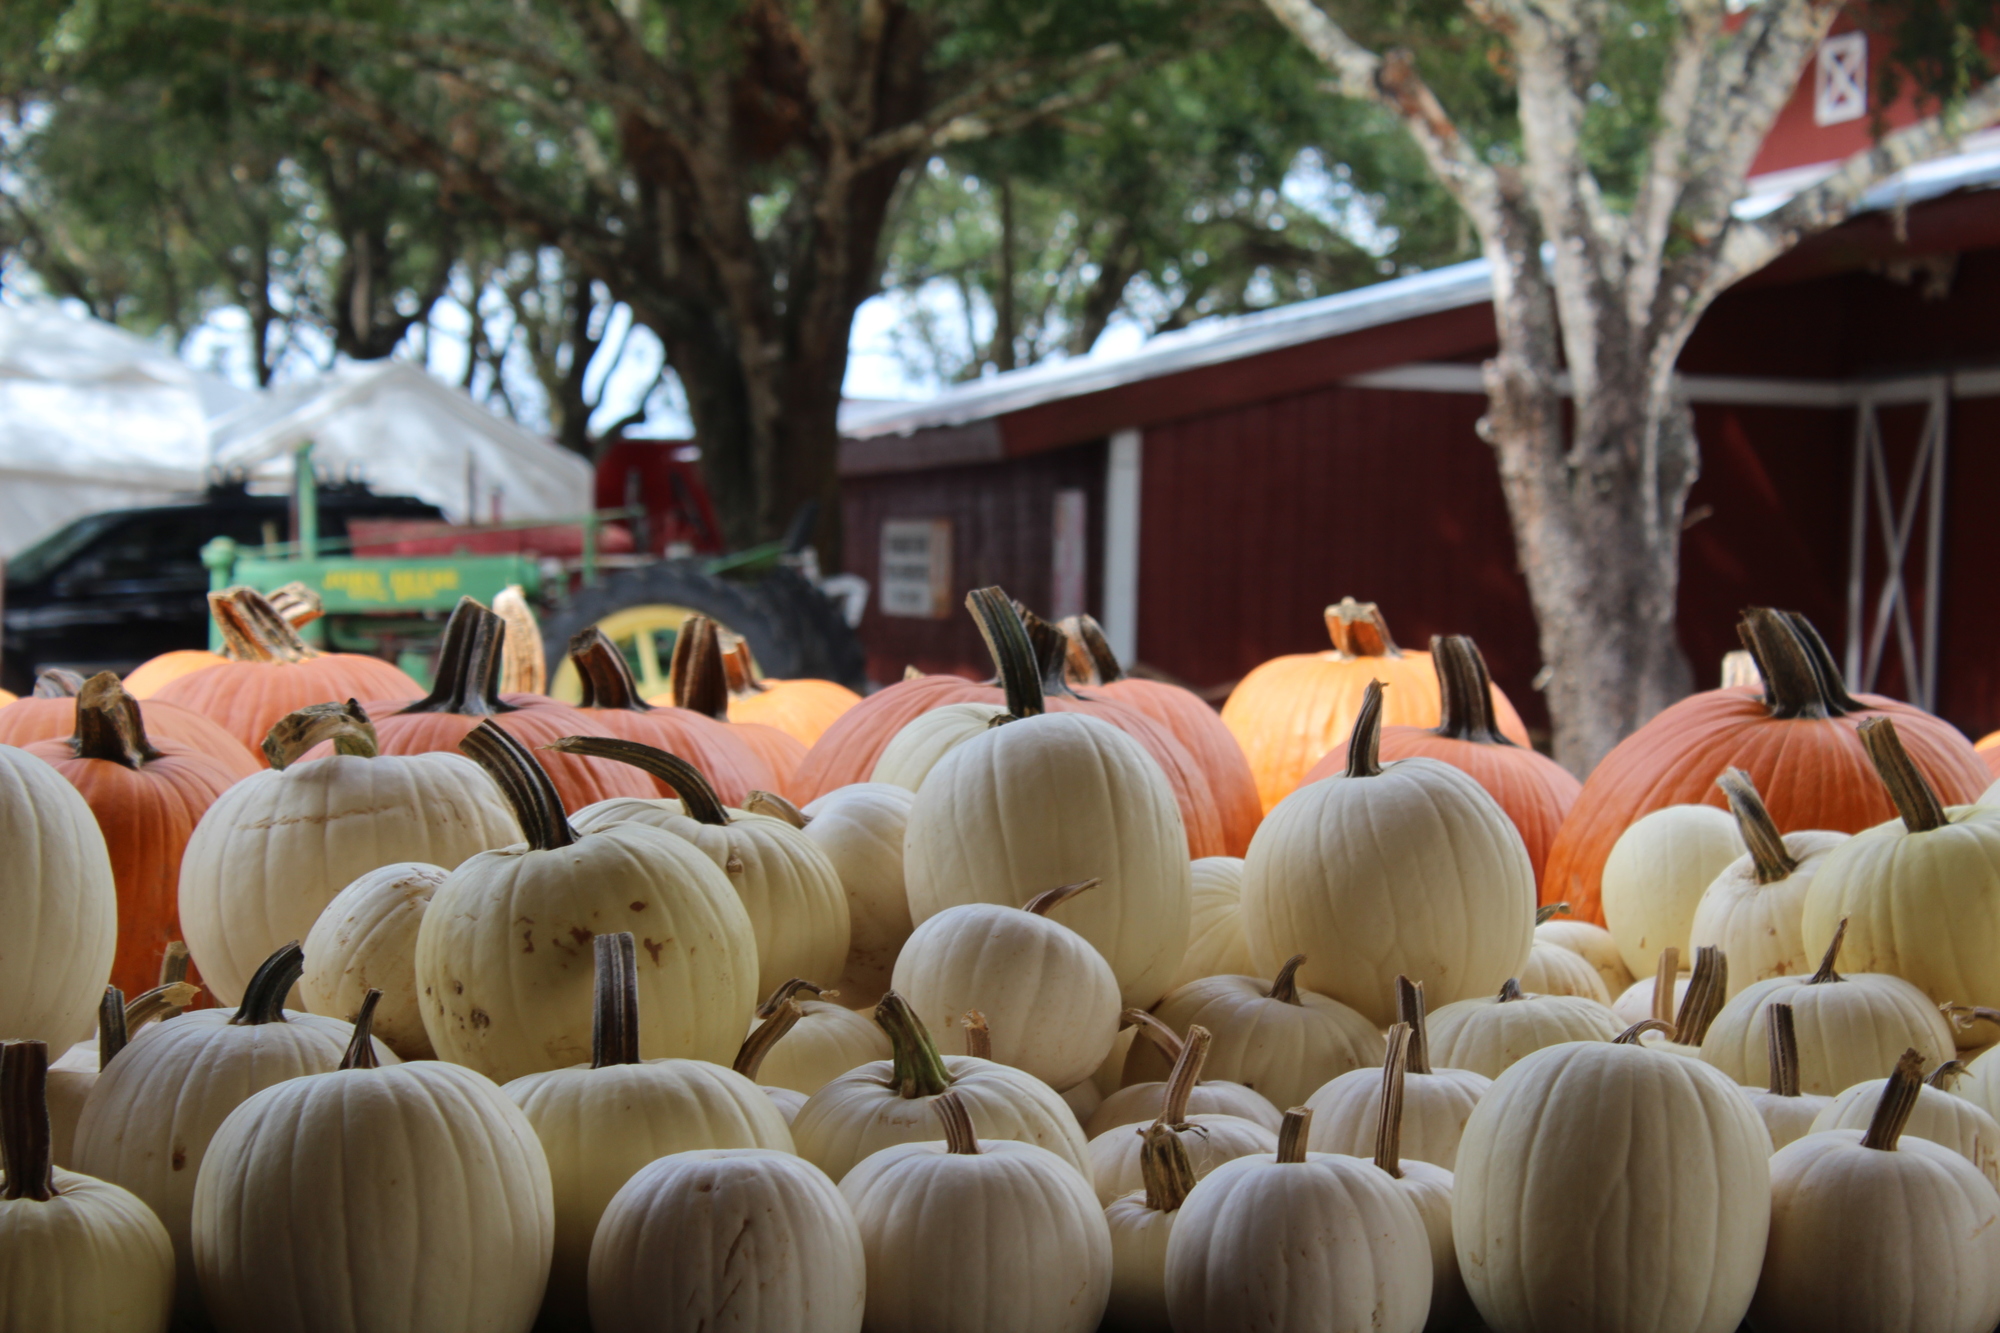 Hunsader Farms will return this year on Oct. 14 with their 26th annual Pumpkin Festival.